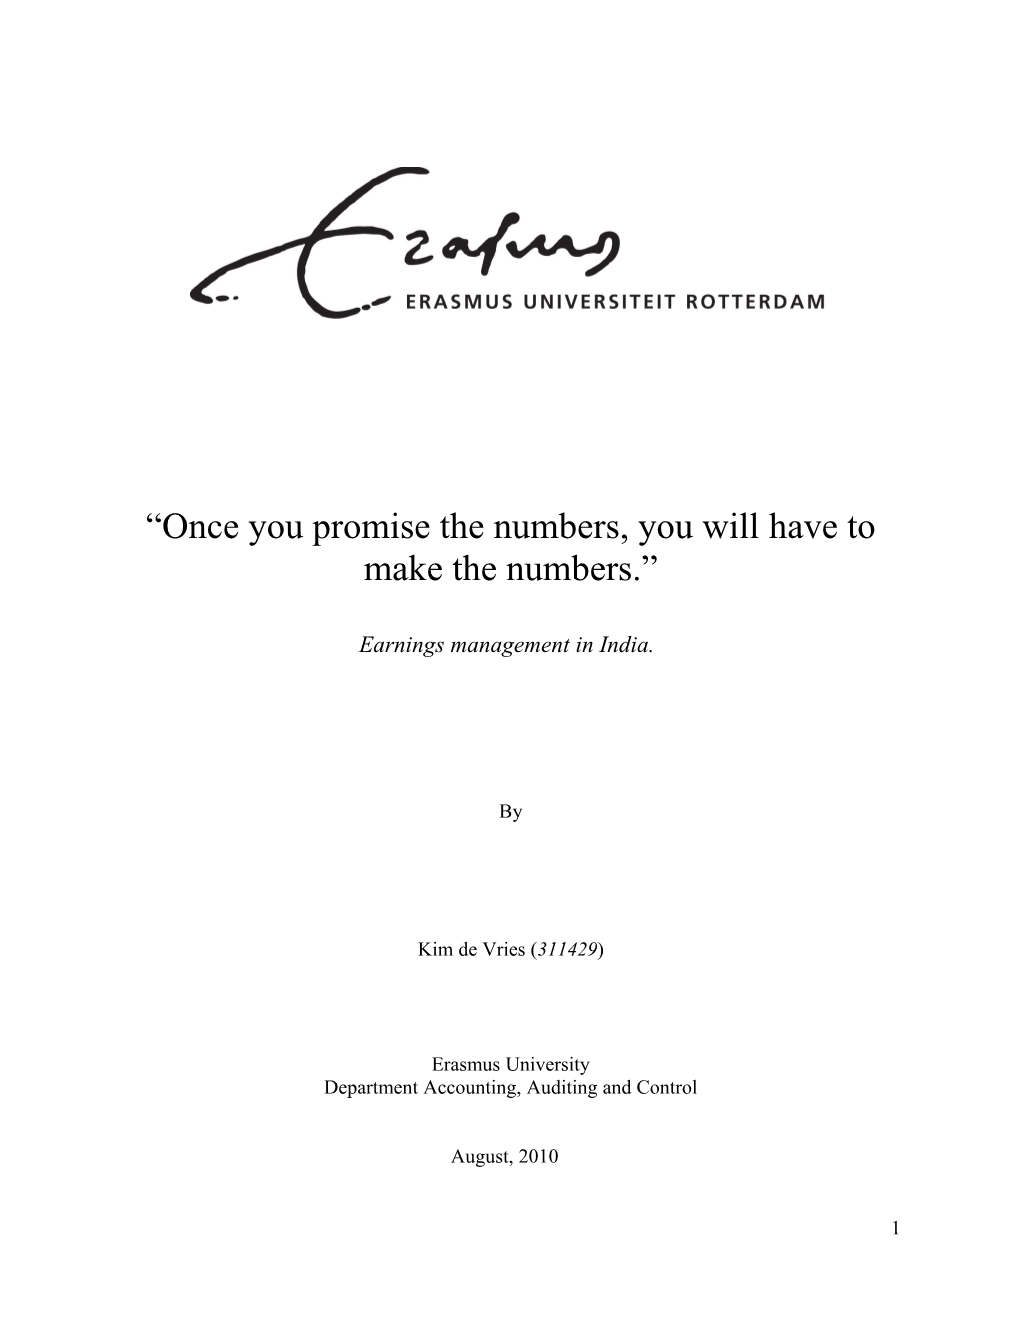 Once You Promise the Numbers, You Willhave to Make the Numbers. Earnings Management in India